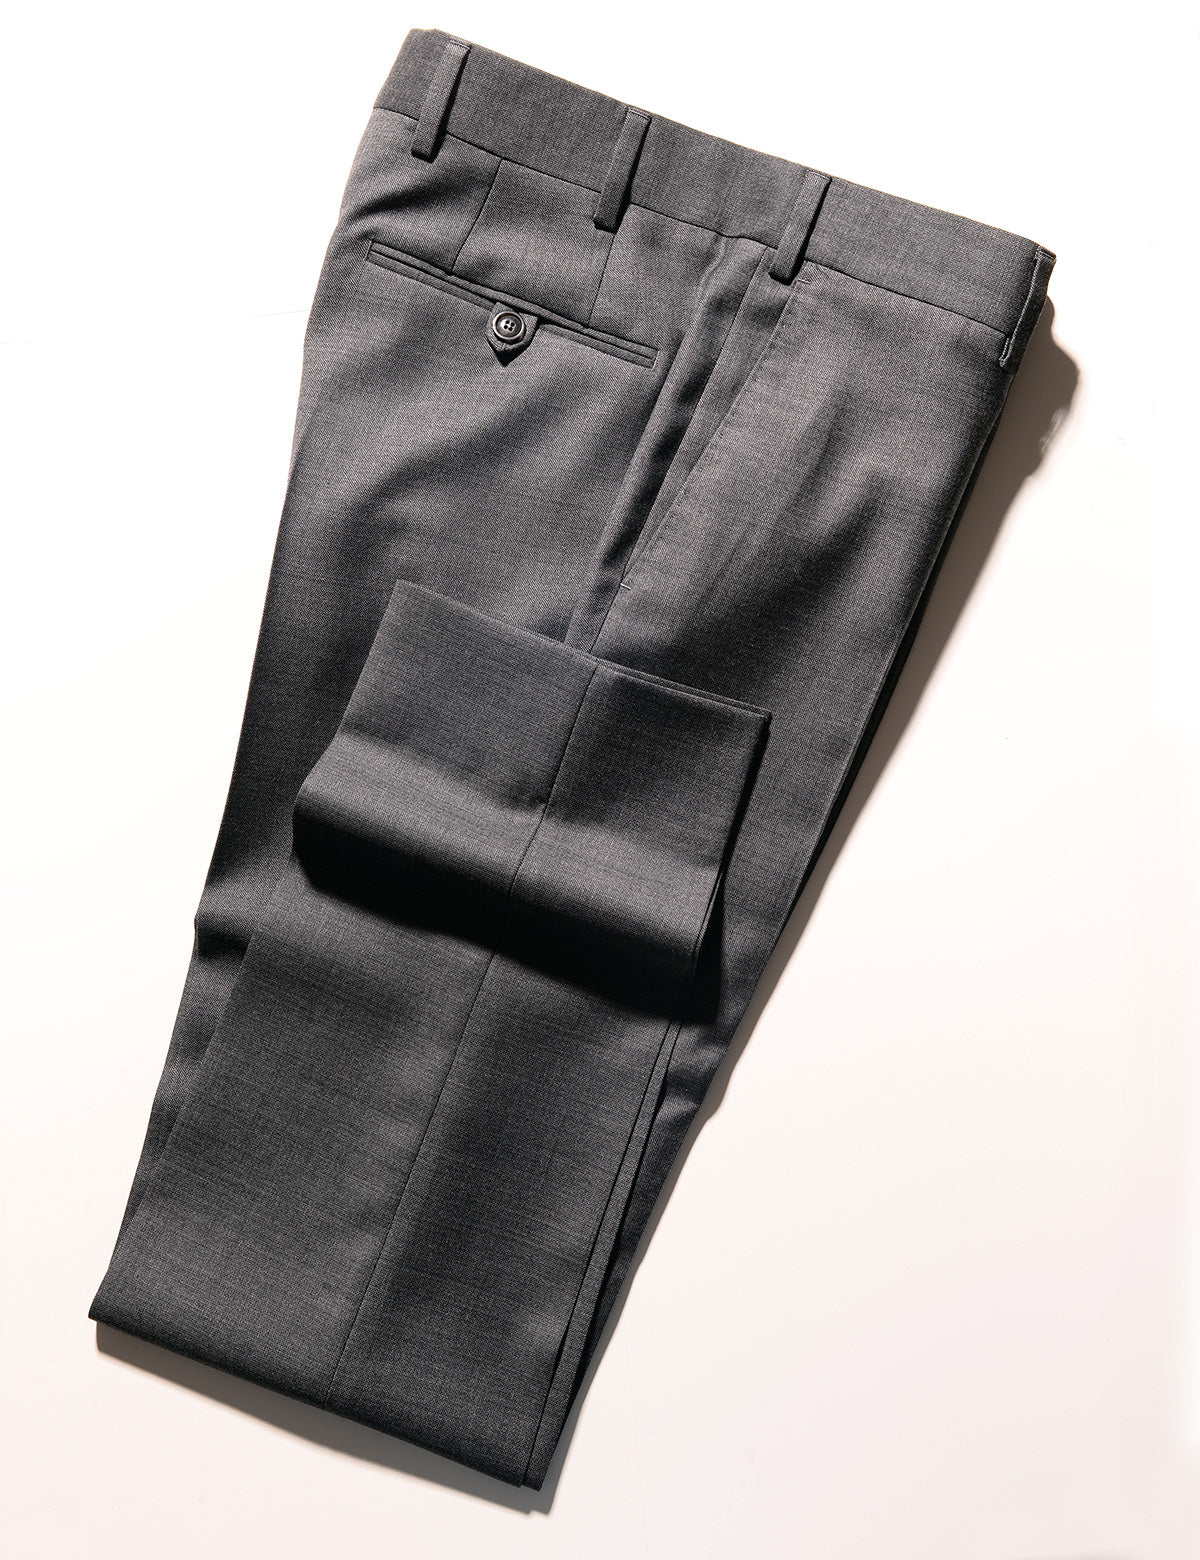 Trouser Detail Photo Showing Front and Back Details